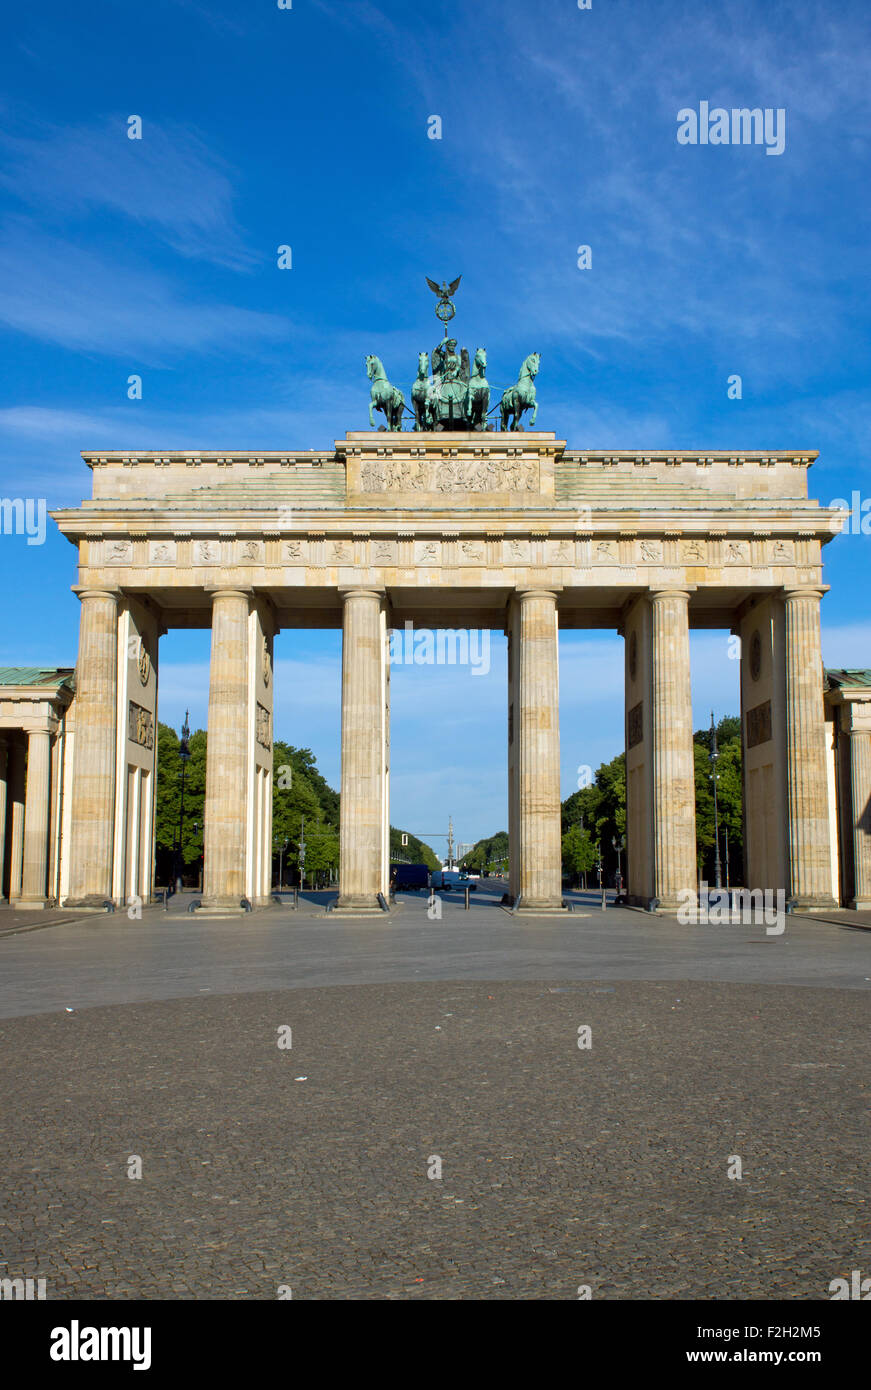 The famous Brandenburger Tor in the center of Berlin Stock Photo